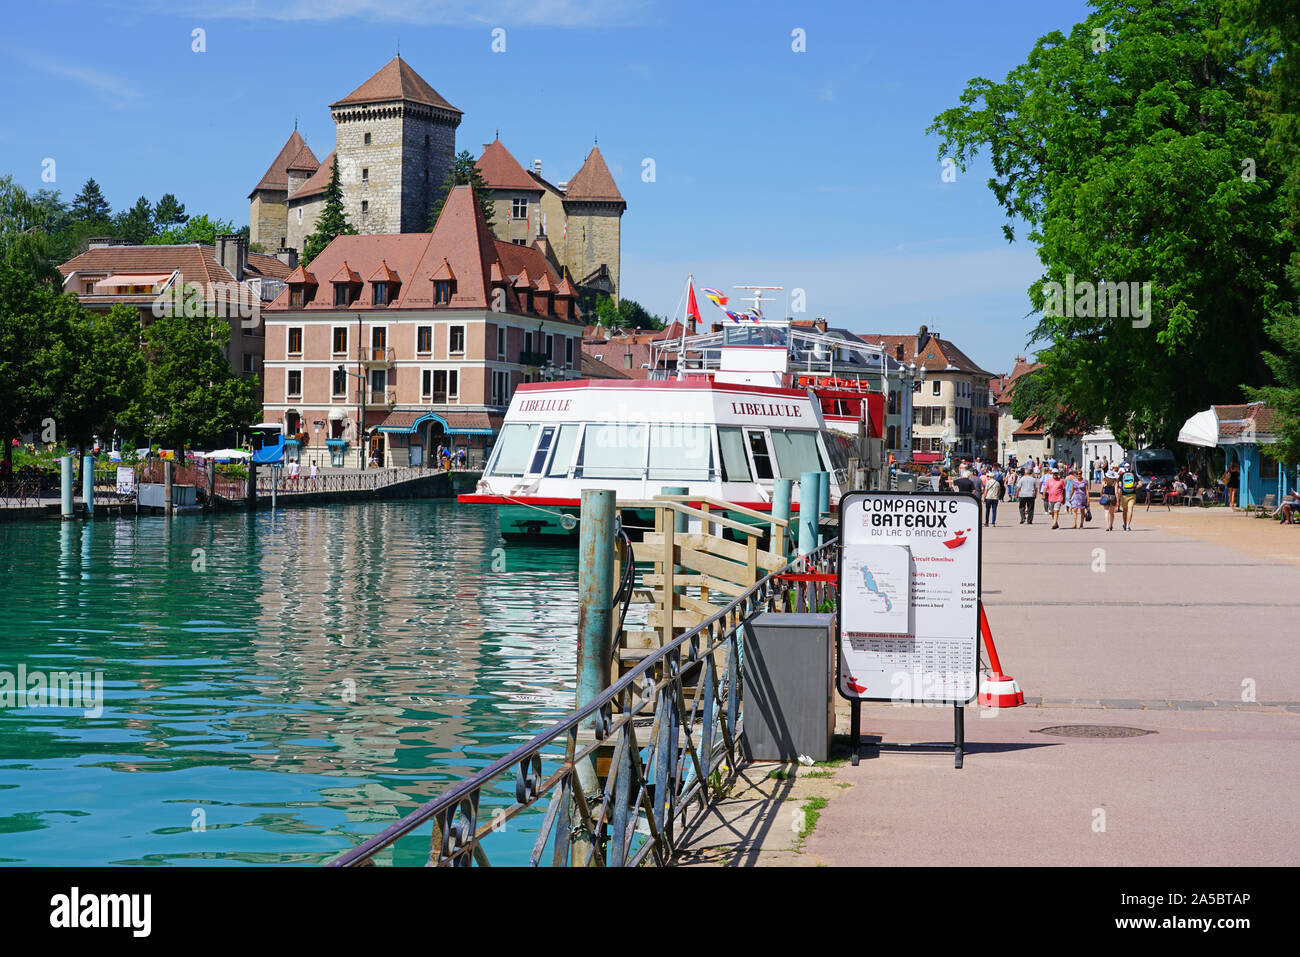 ANNECY, FRANCE -24 JUN 2019- View of the Libellule boat on the lake in the Old Town in Annecy, Haute Savoie, France. Stock Photo